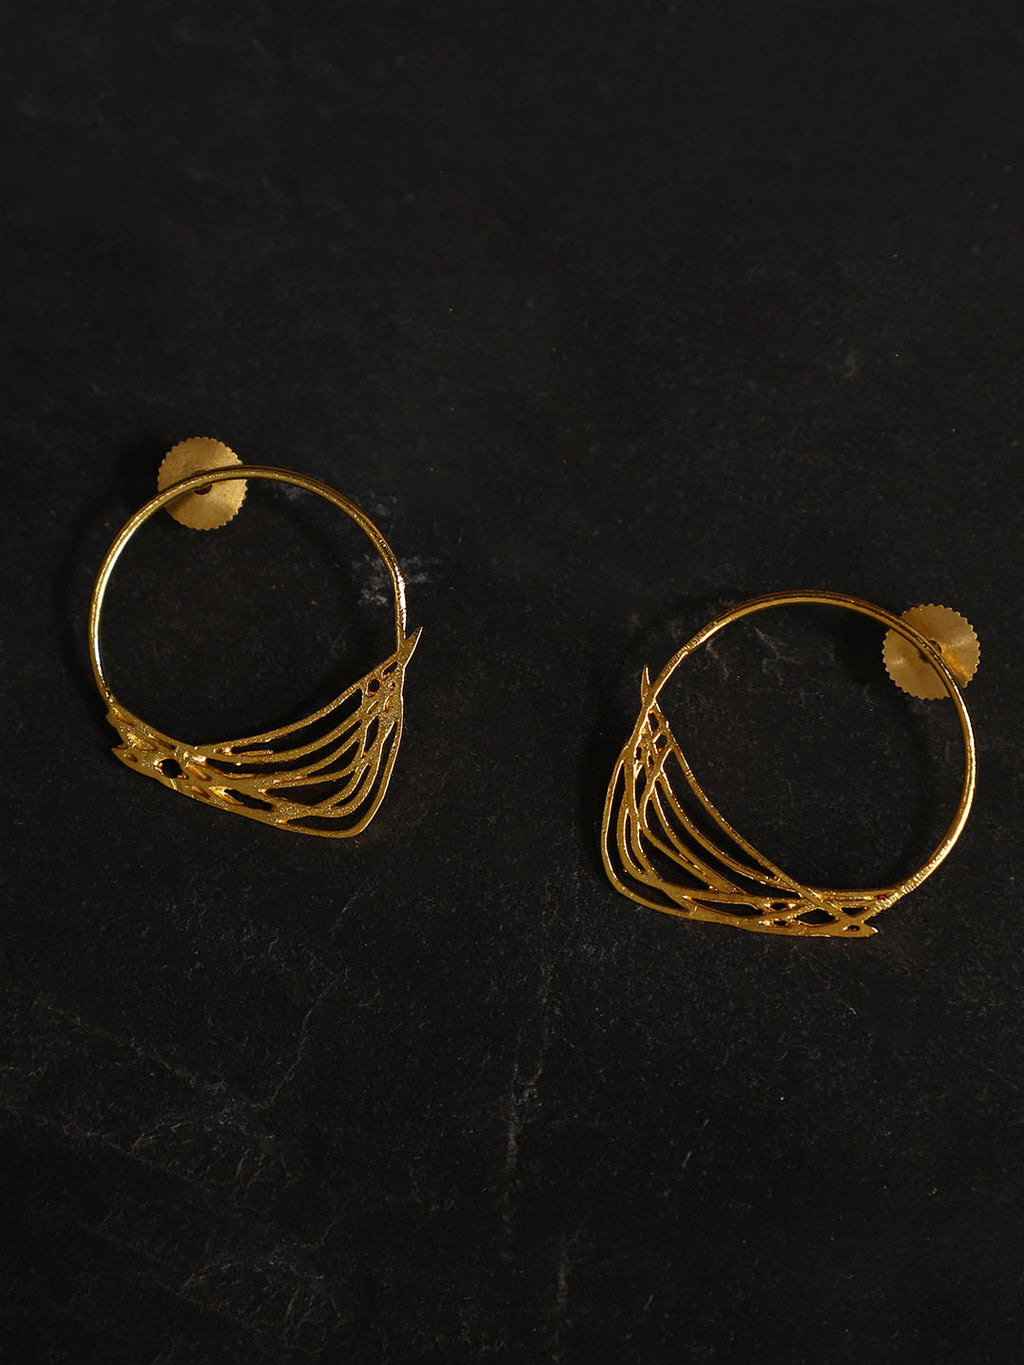 Gold Plated Abstract Ring Studs, Earrings - Shopberserk